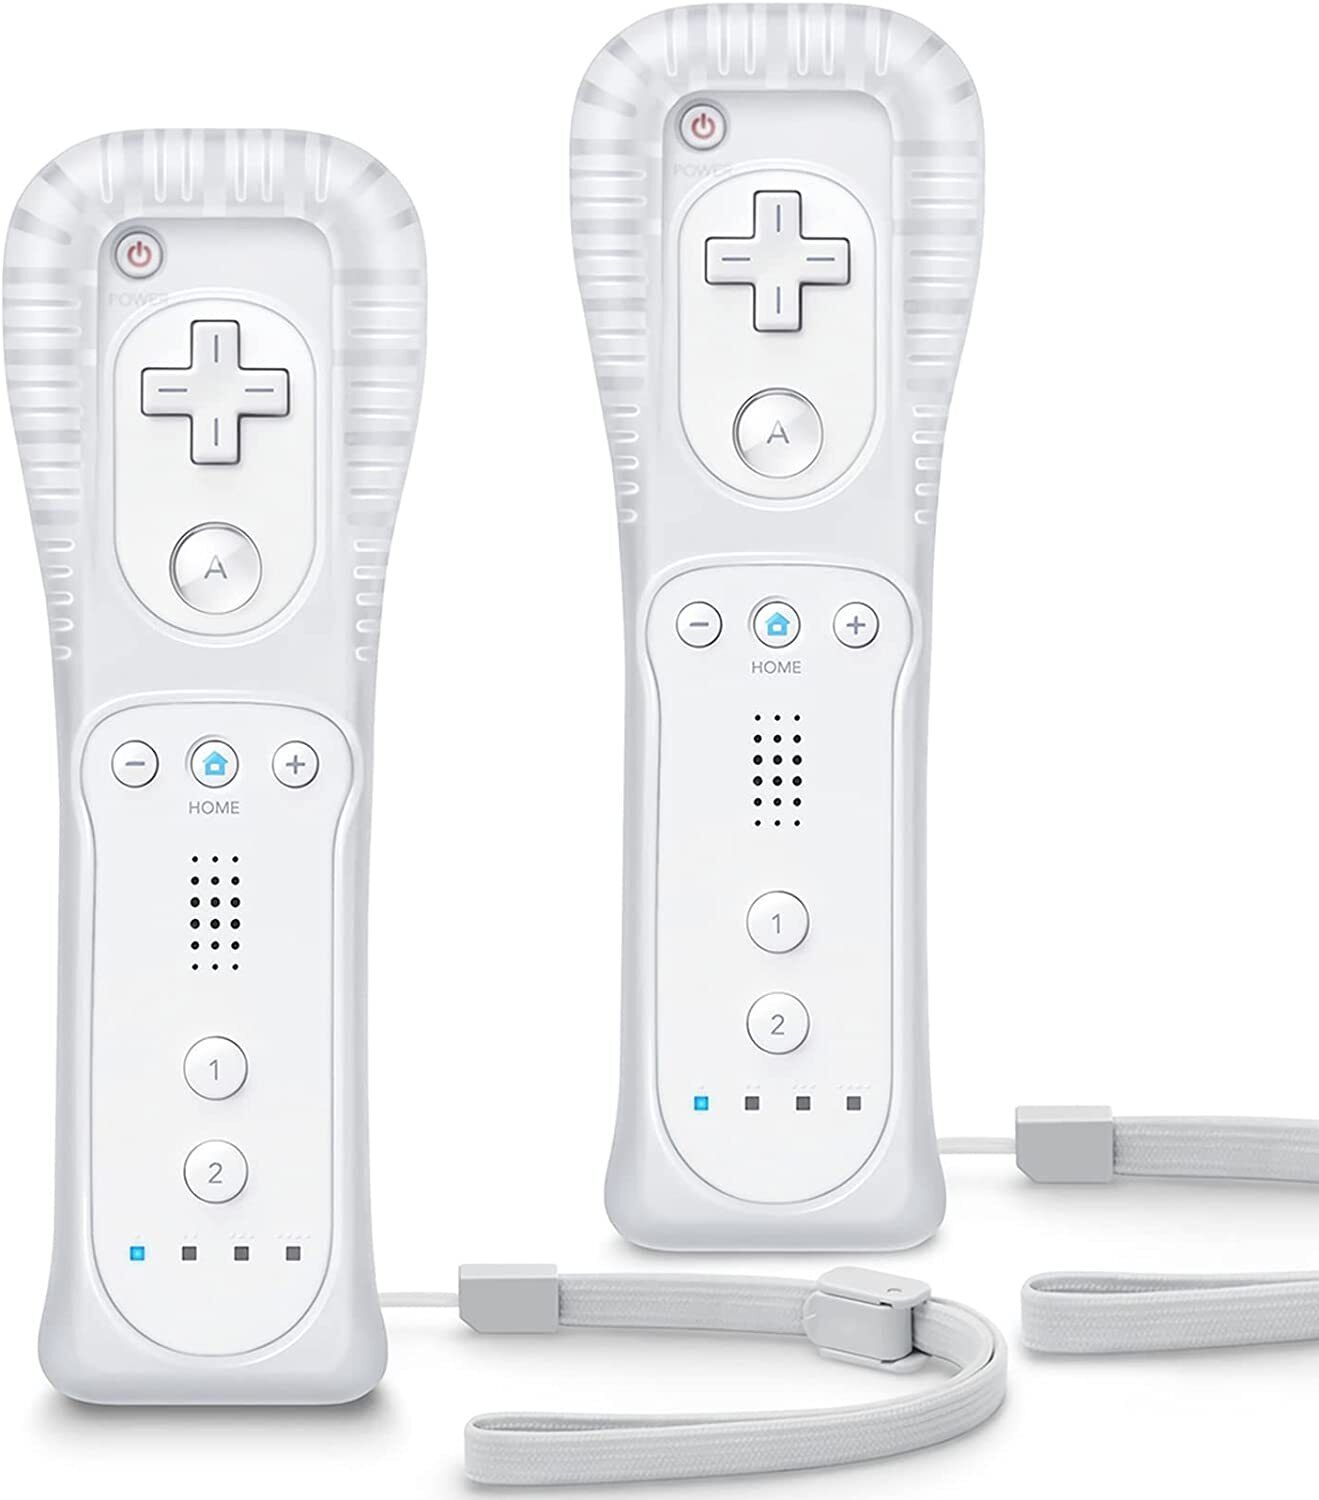 onbekend Wirwar Voorzitter 2Pack Wii Remote Controller For Wii Wii U Gaming With Built in Motion Plus  White | eBay